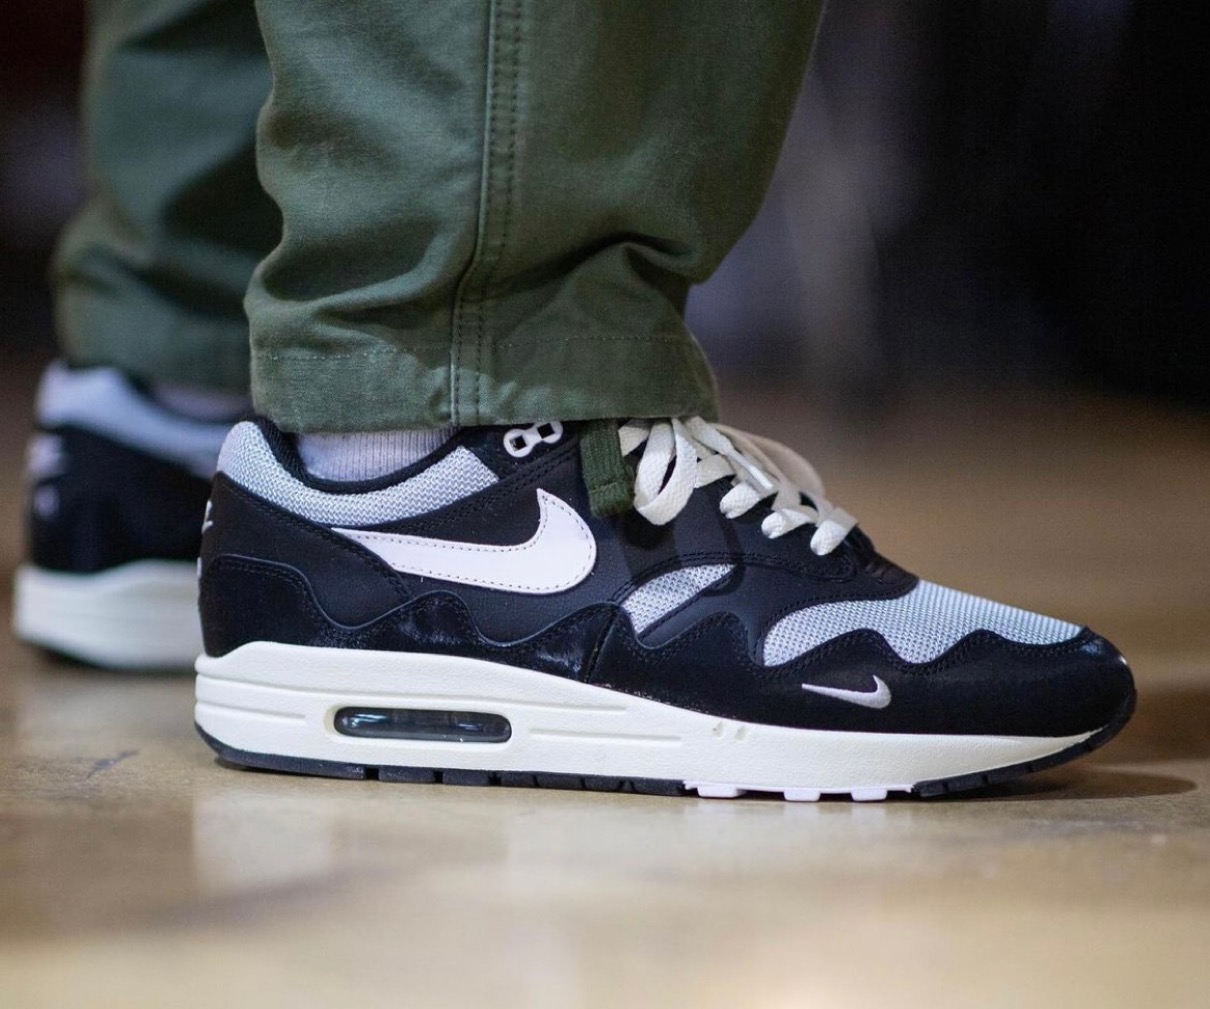 Patta × Nike Air Max 1 The Wave “Black”が12月10日より発売予定 | UP 